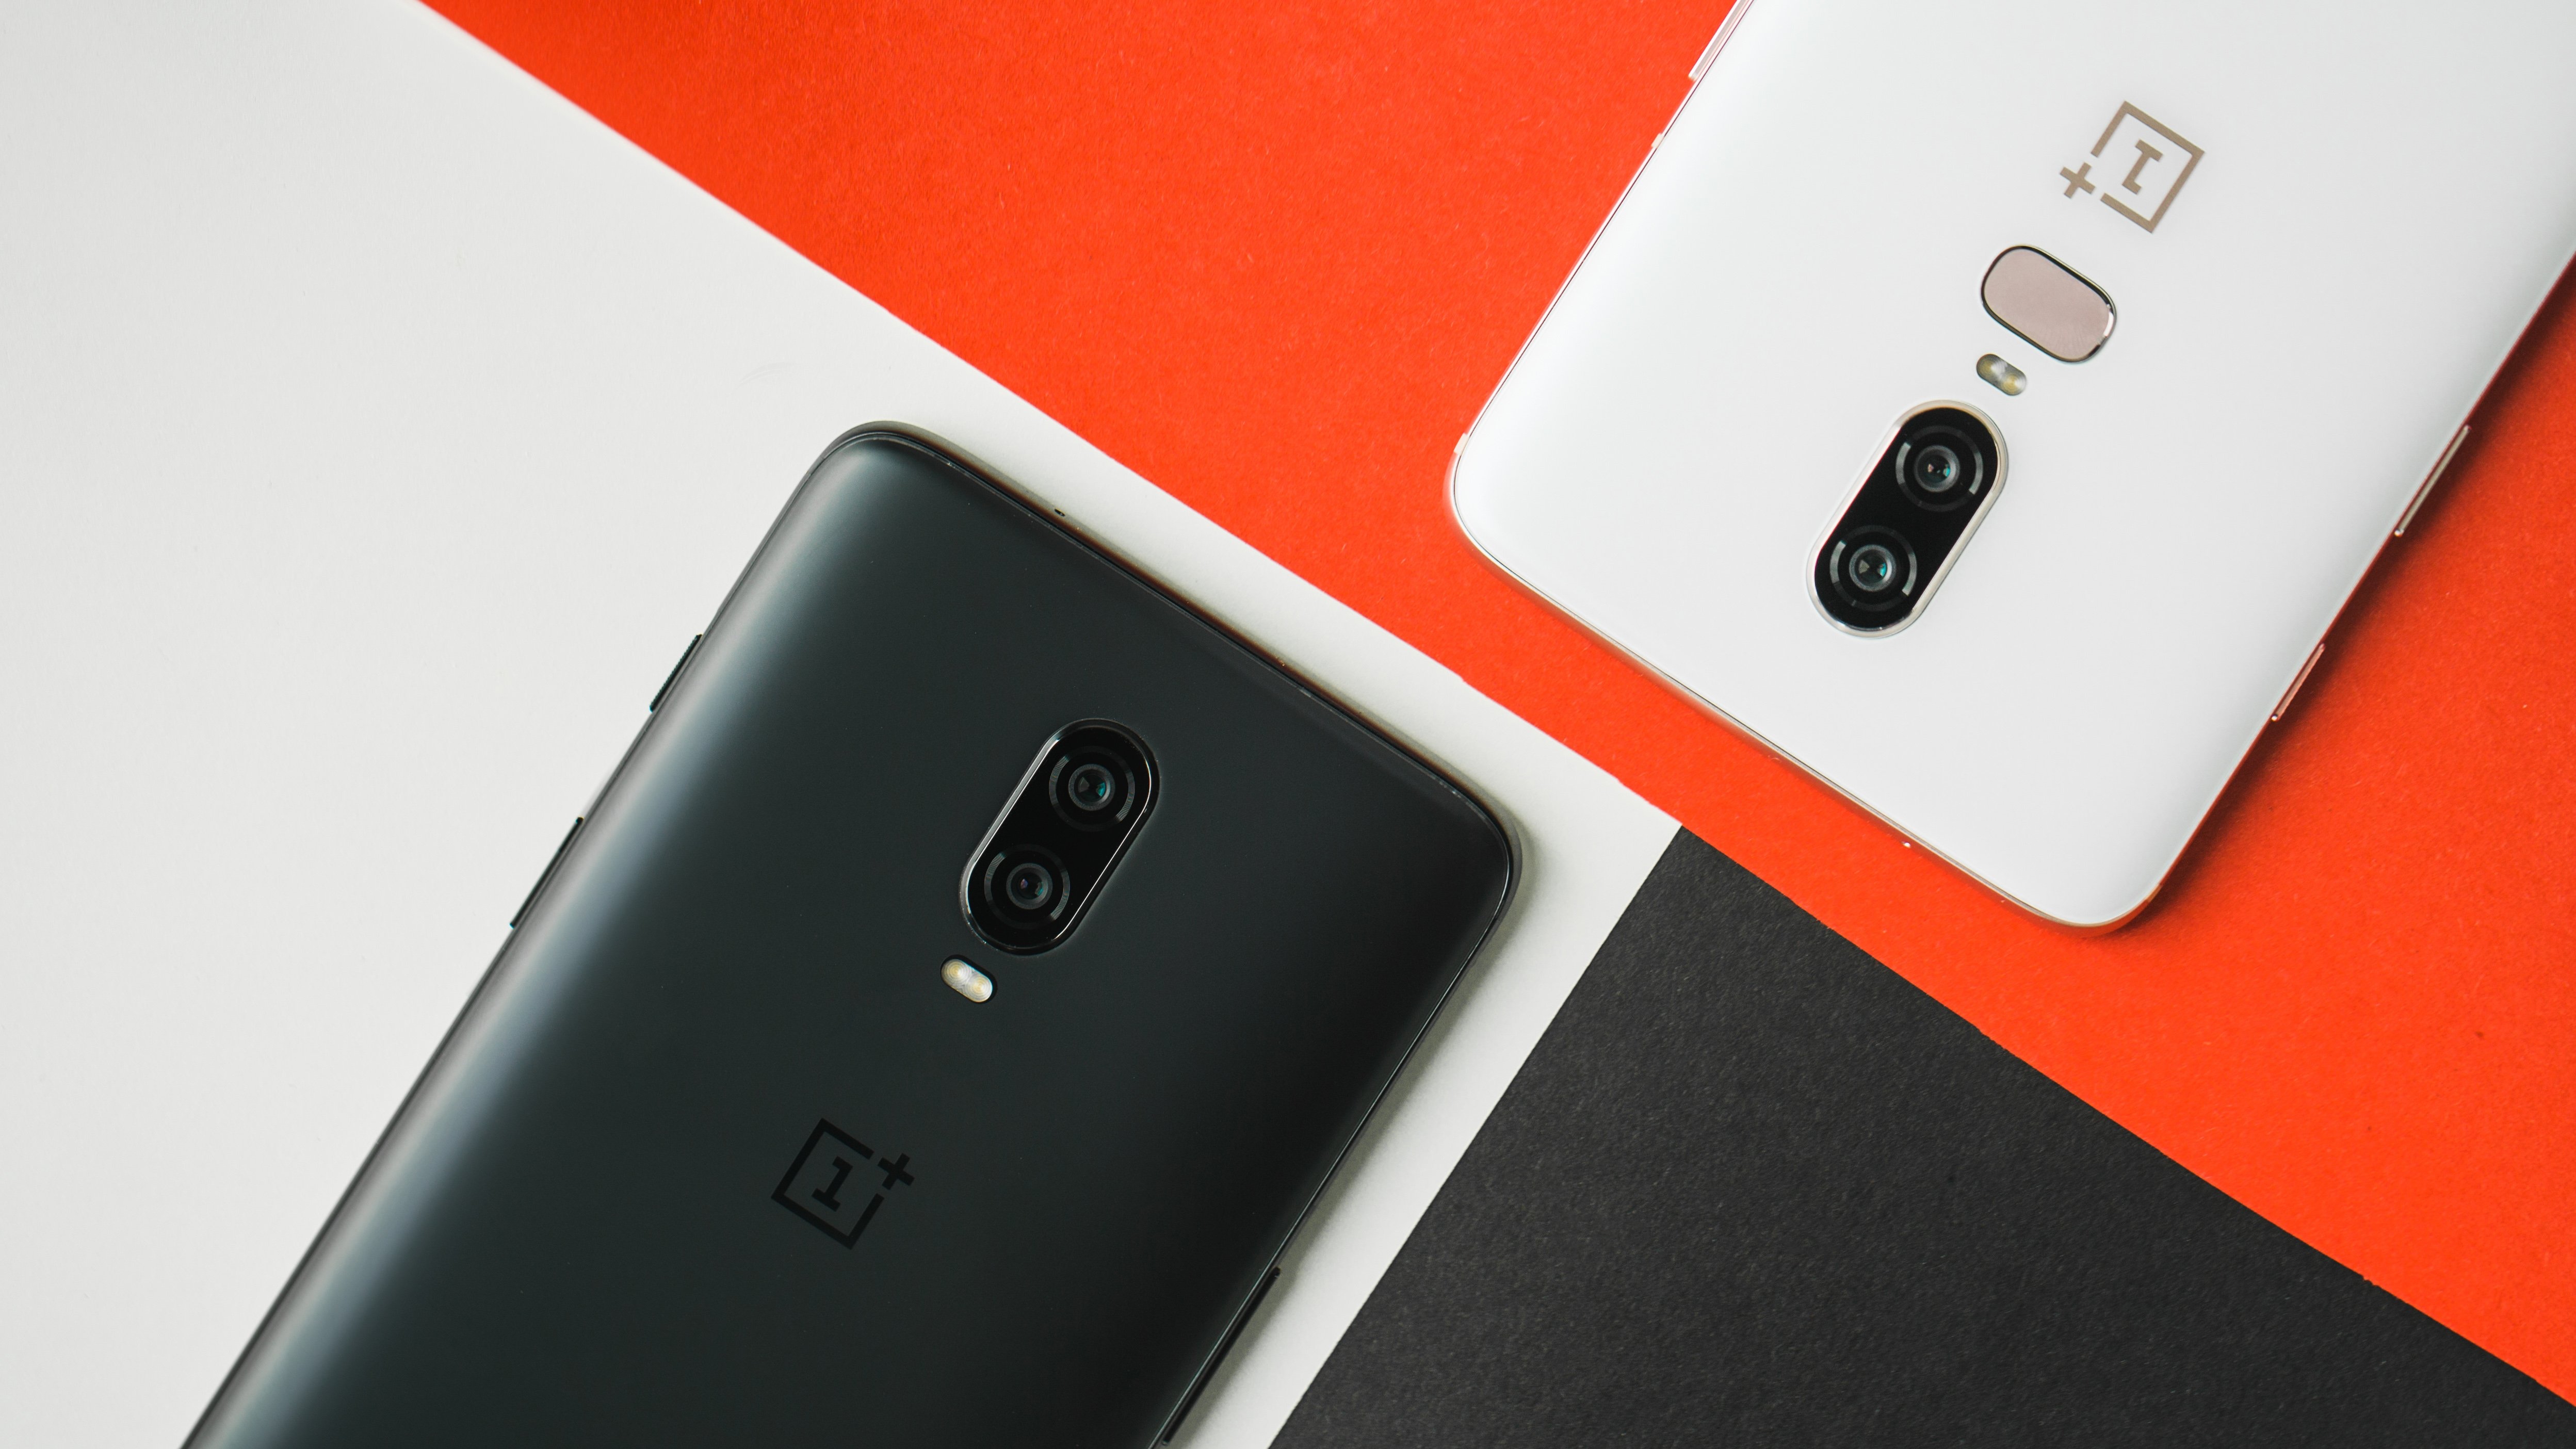 OnePlus 6 and OnePlus 6T receive new OxygenOS update